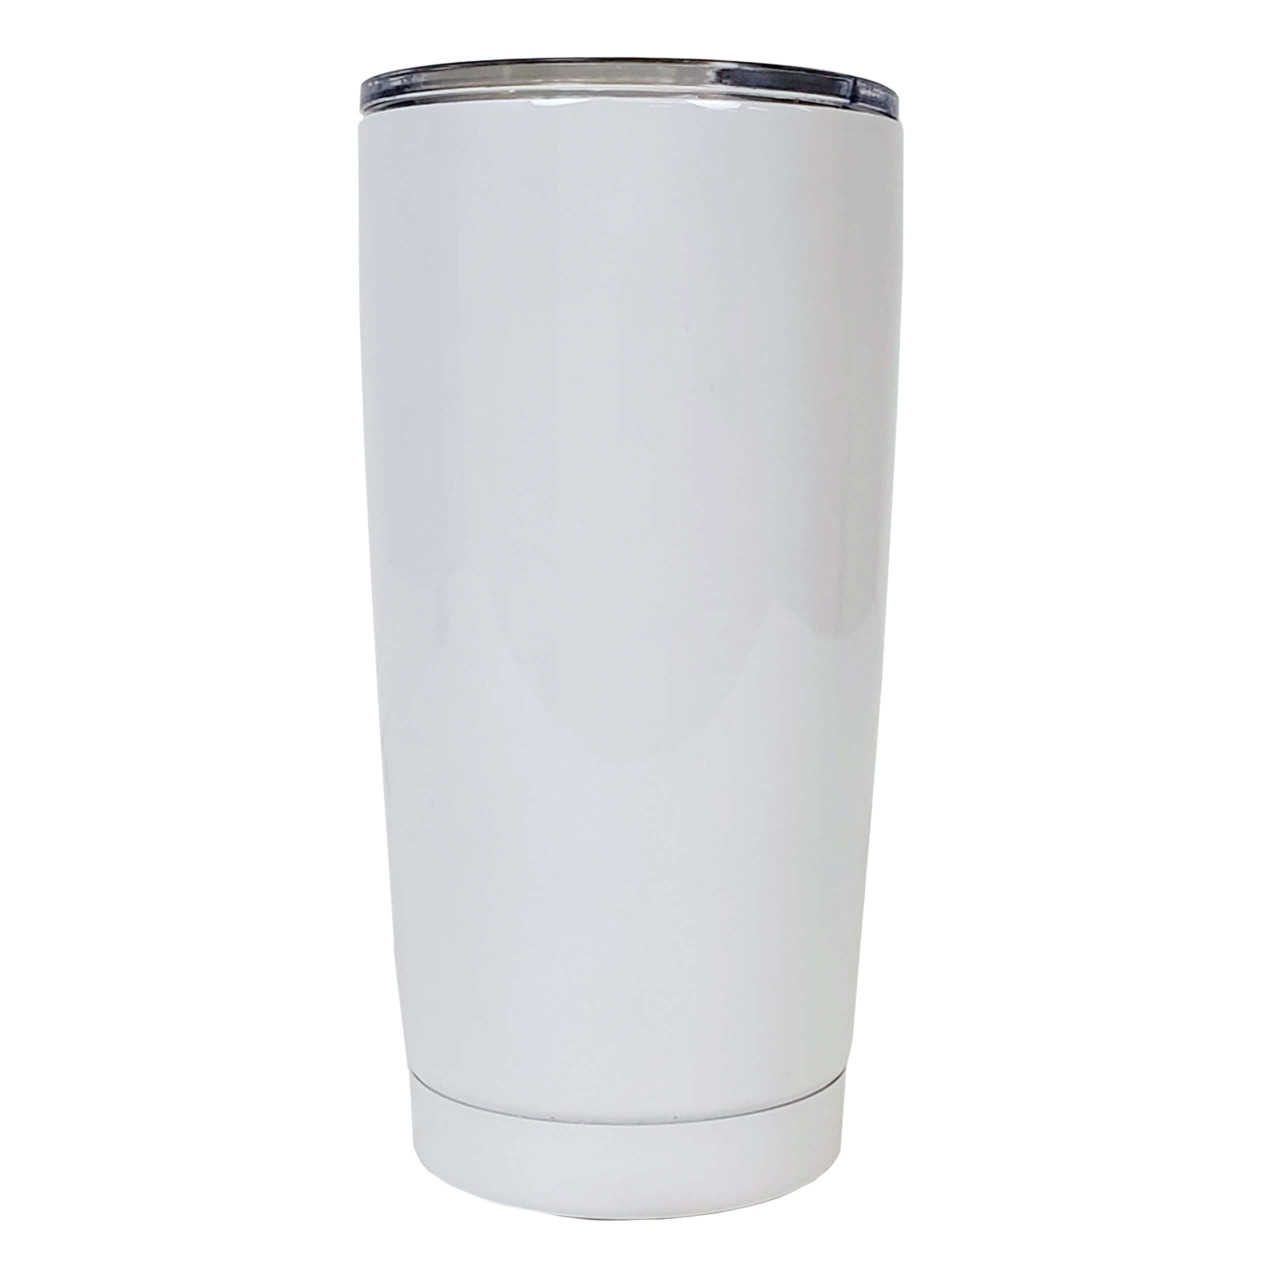 16 oz. Stainless Steel “Red Solo Cup” Shaped Tumbler